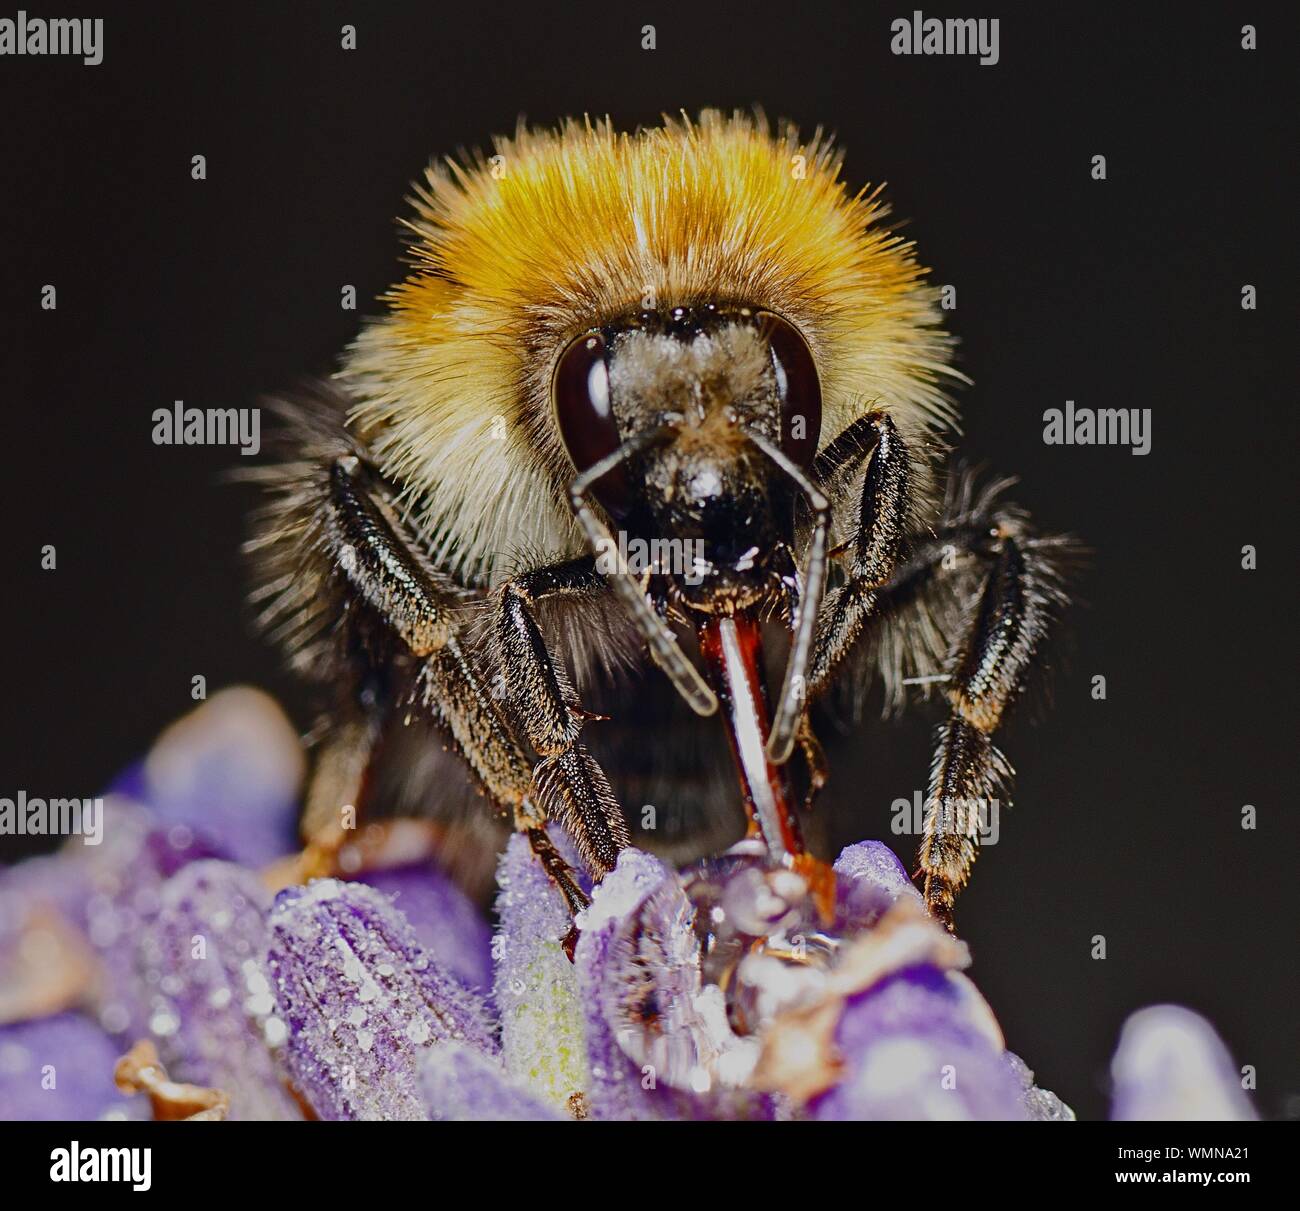 Close-up Of Honey Bee Collecting Nectar From Flower Stock Photo